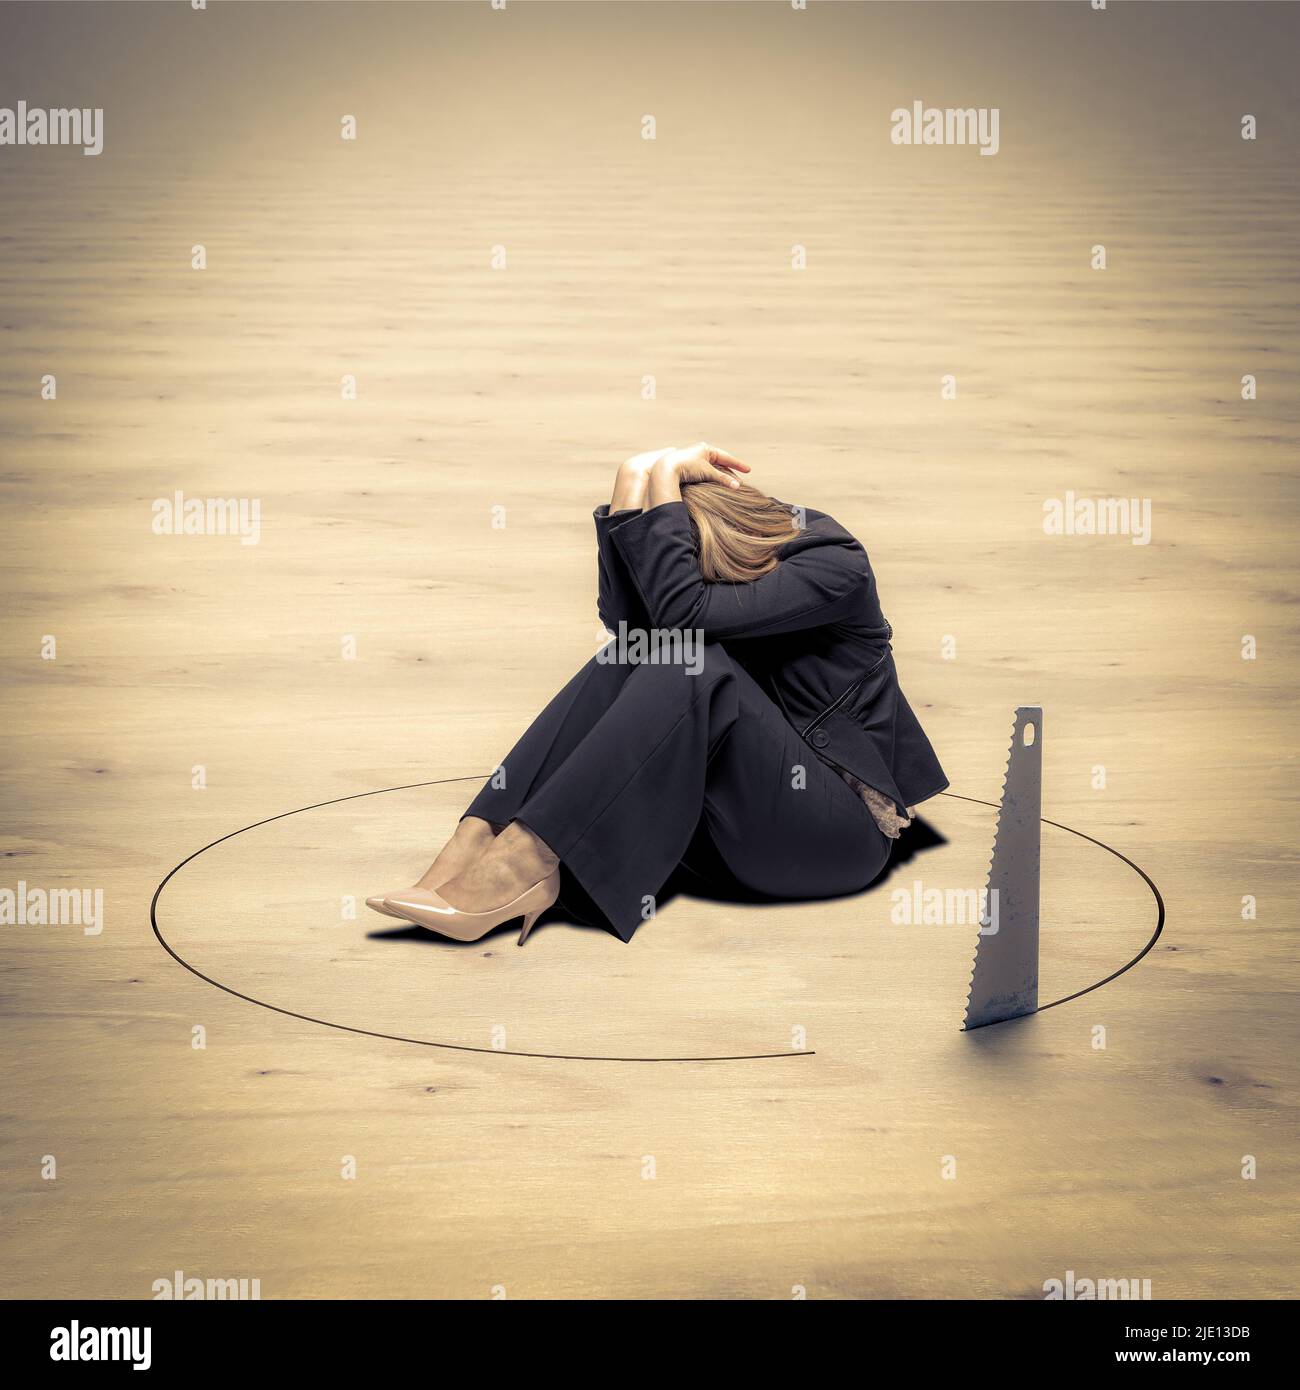 desperate woman sitting on the ground and saw trying to cut a hole to make it fall. Stock Photo